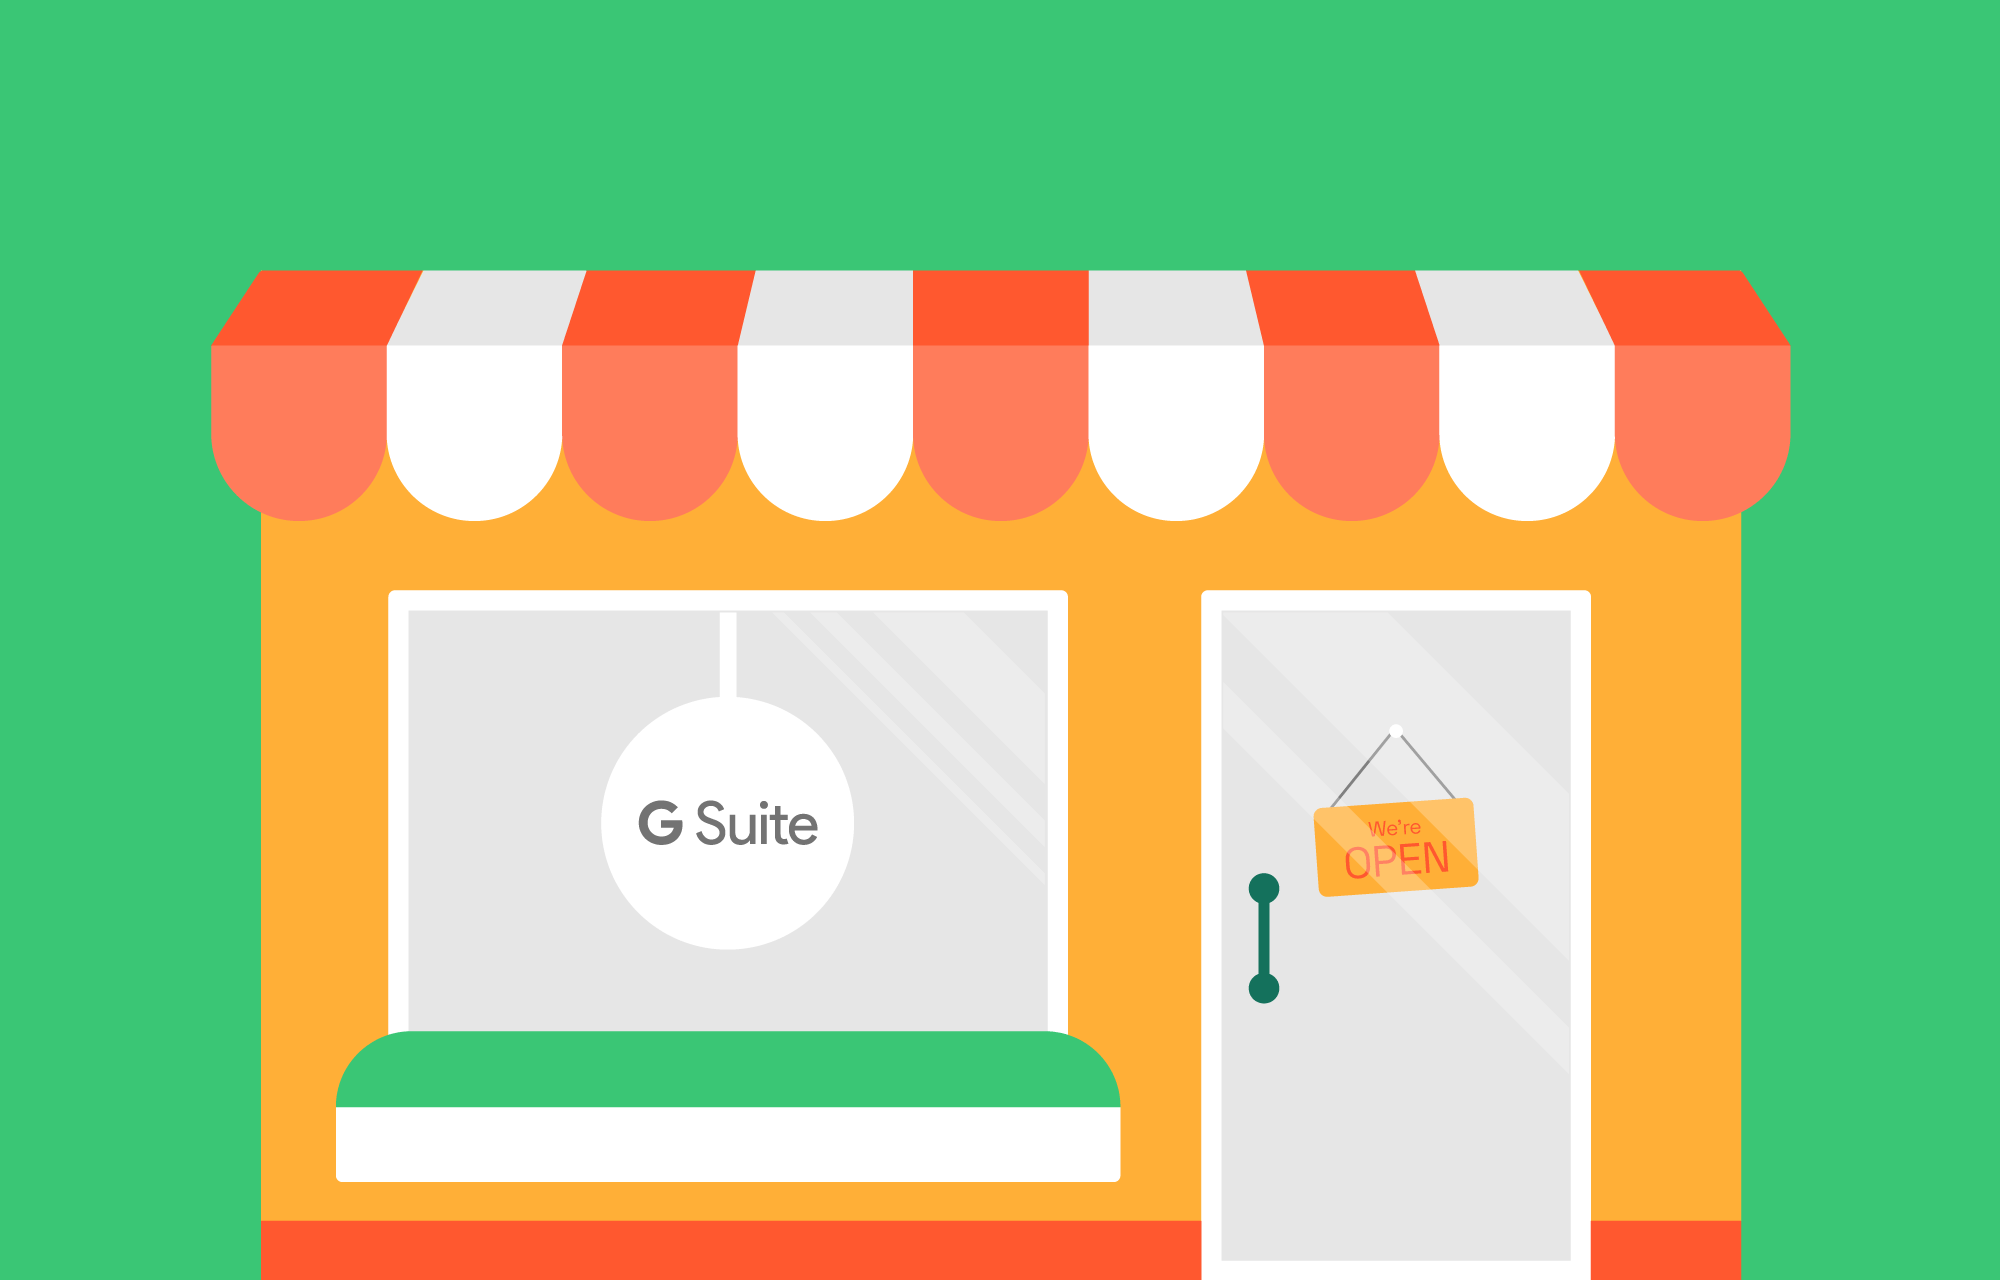 Why buy G Suite from a reseller?